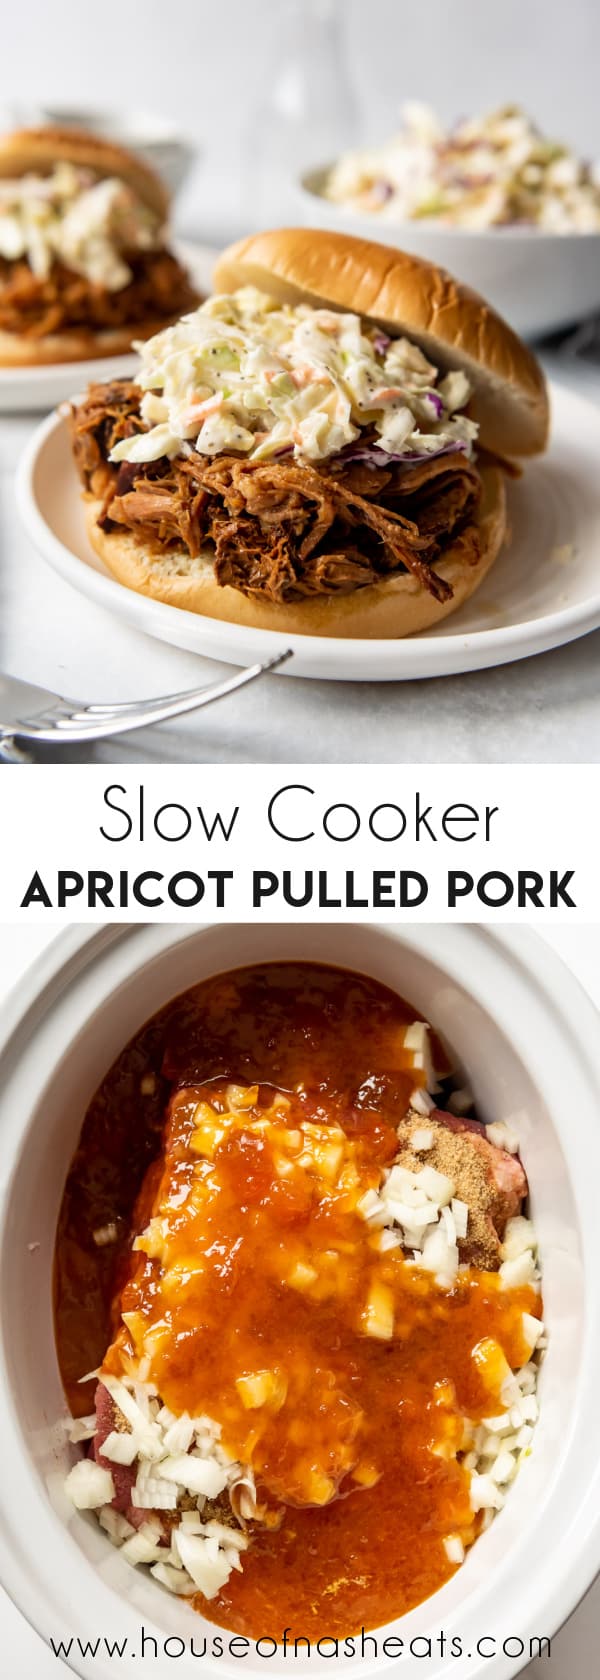 A collage of images of slow cooker apricot pulled pork with text overlay.